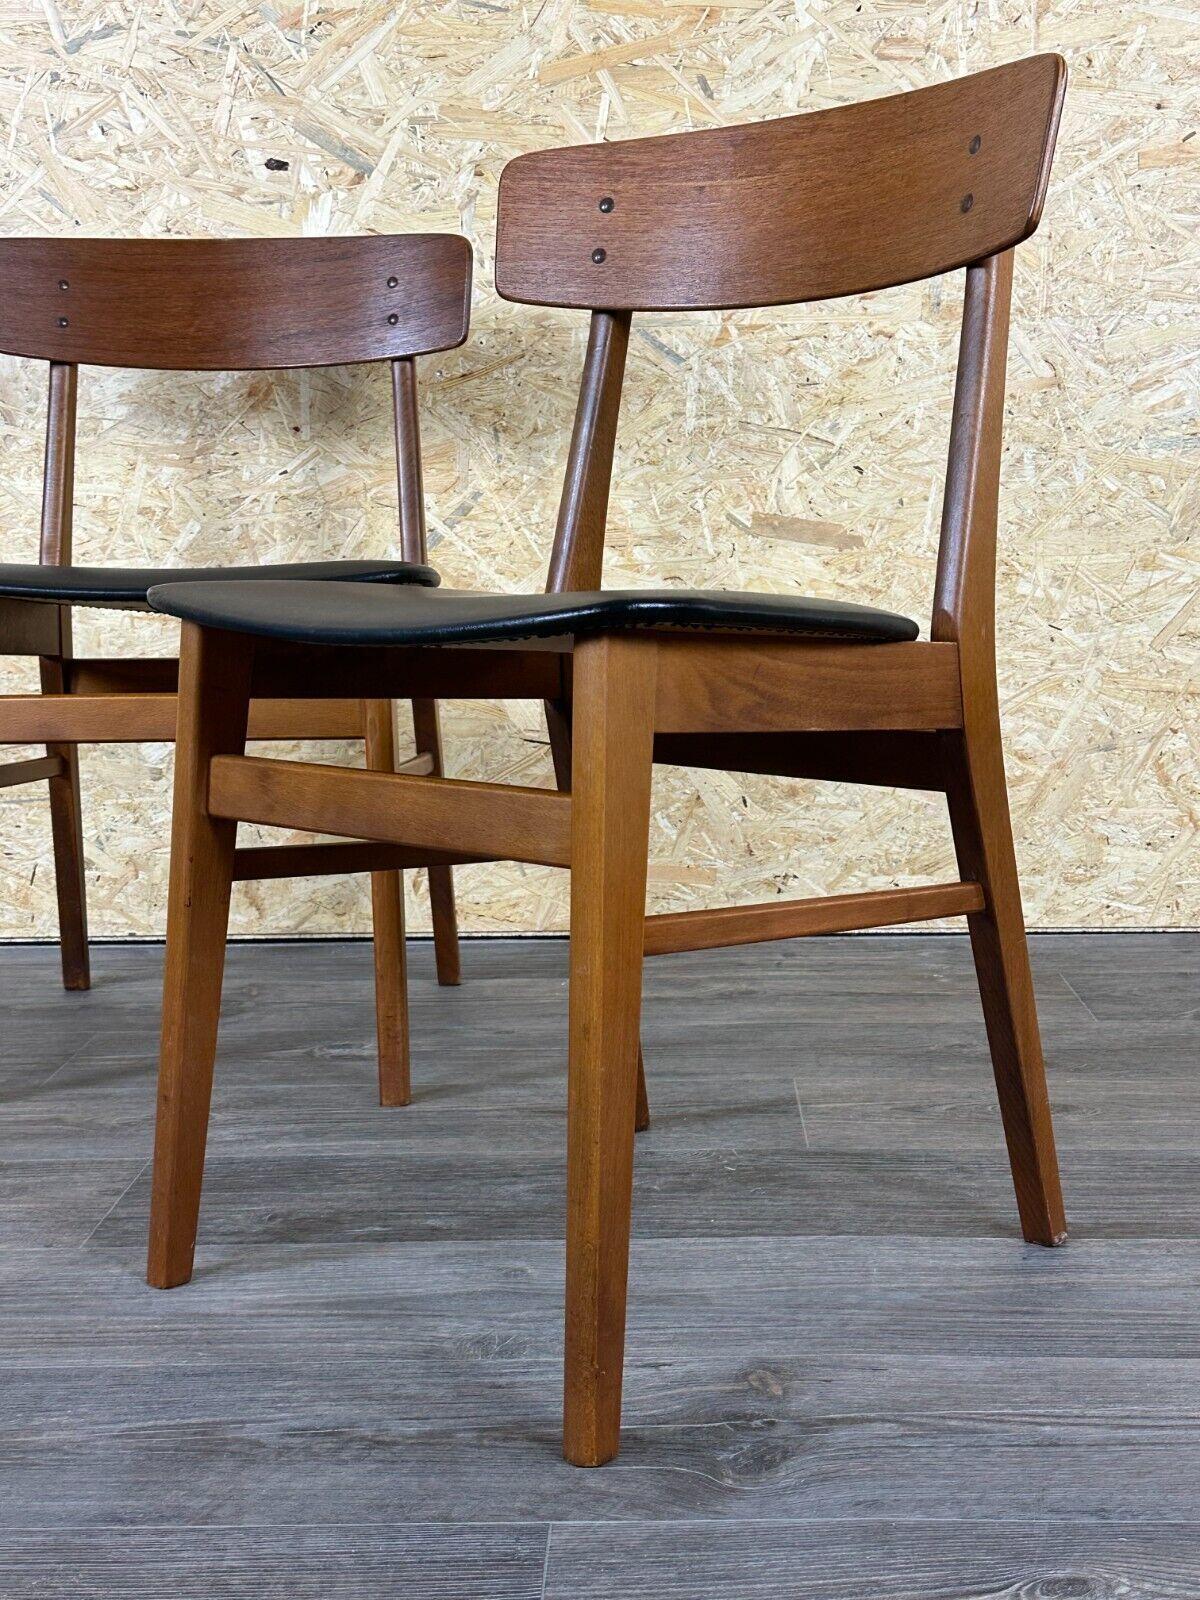 2x 60s 70s teak dining chair by Farstrup Møbler Made in Denmark For Sale 2